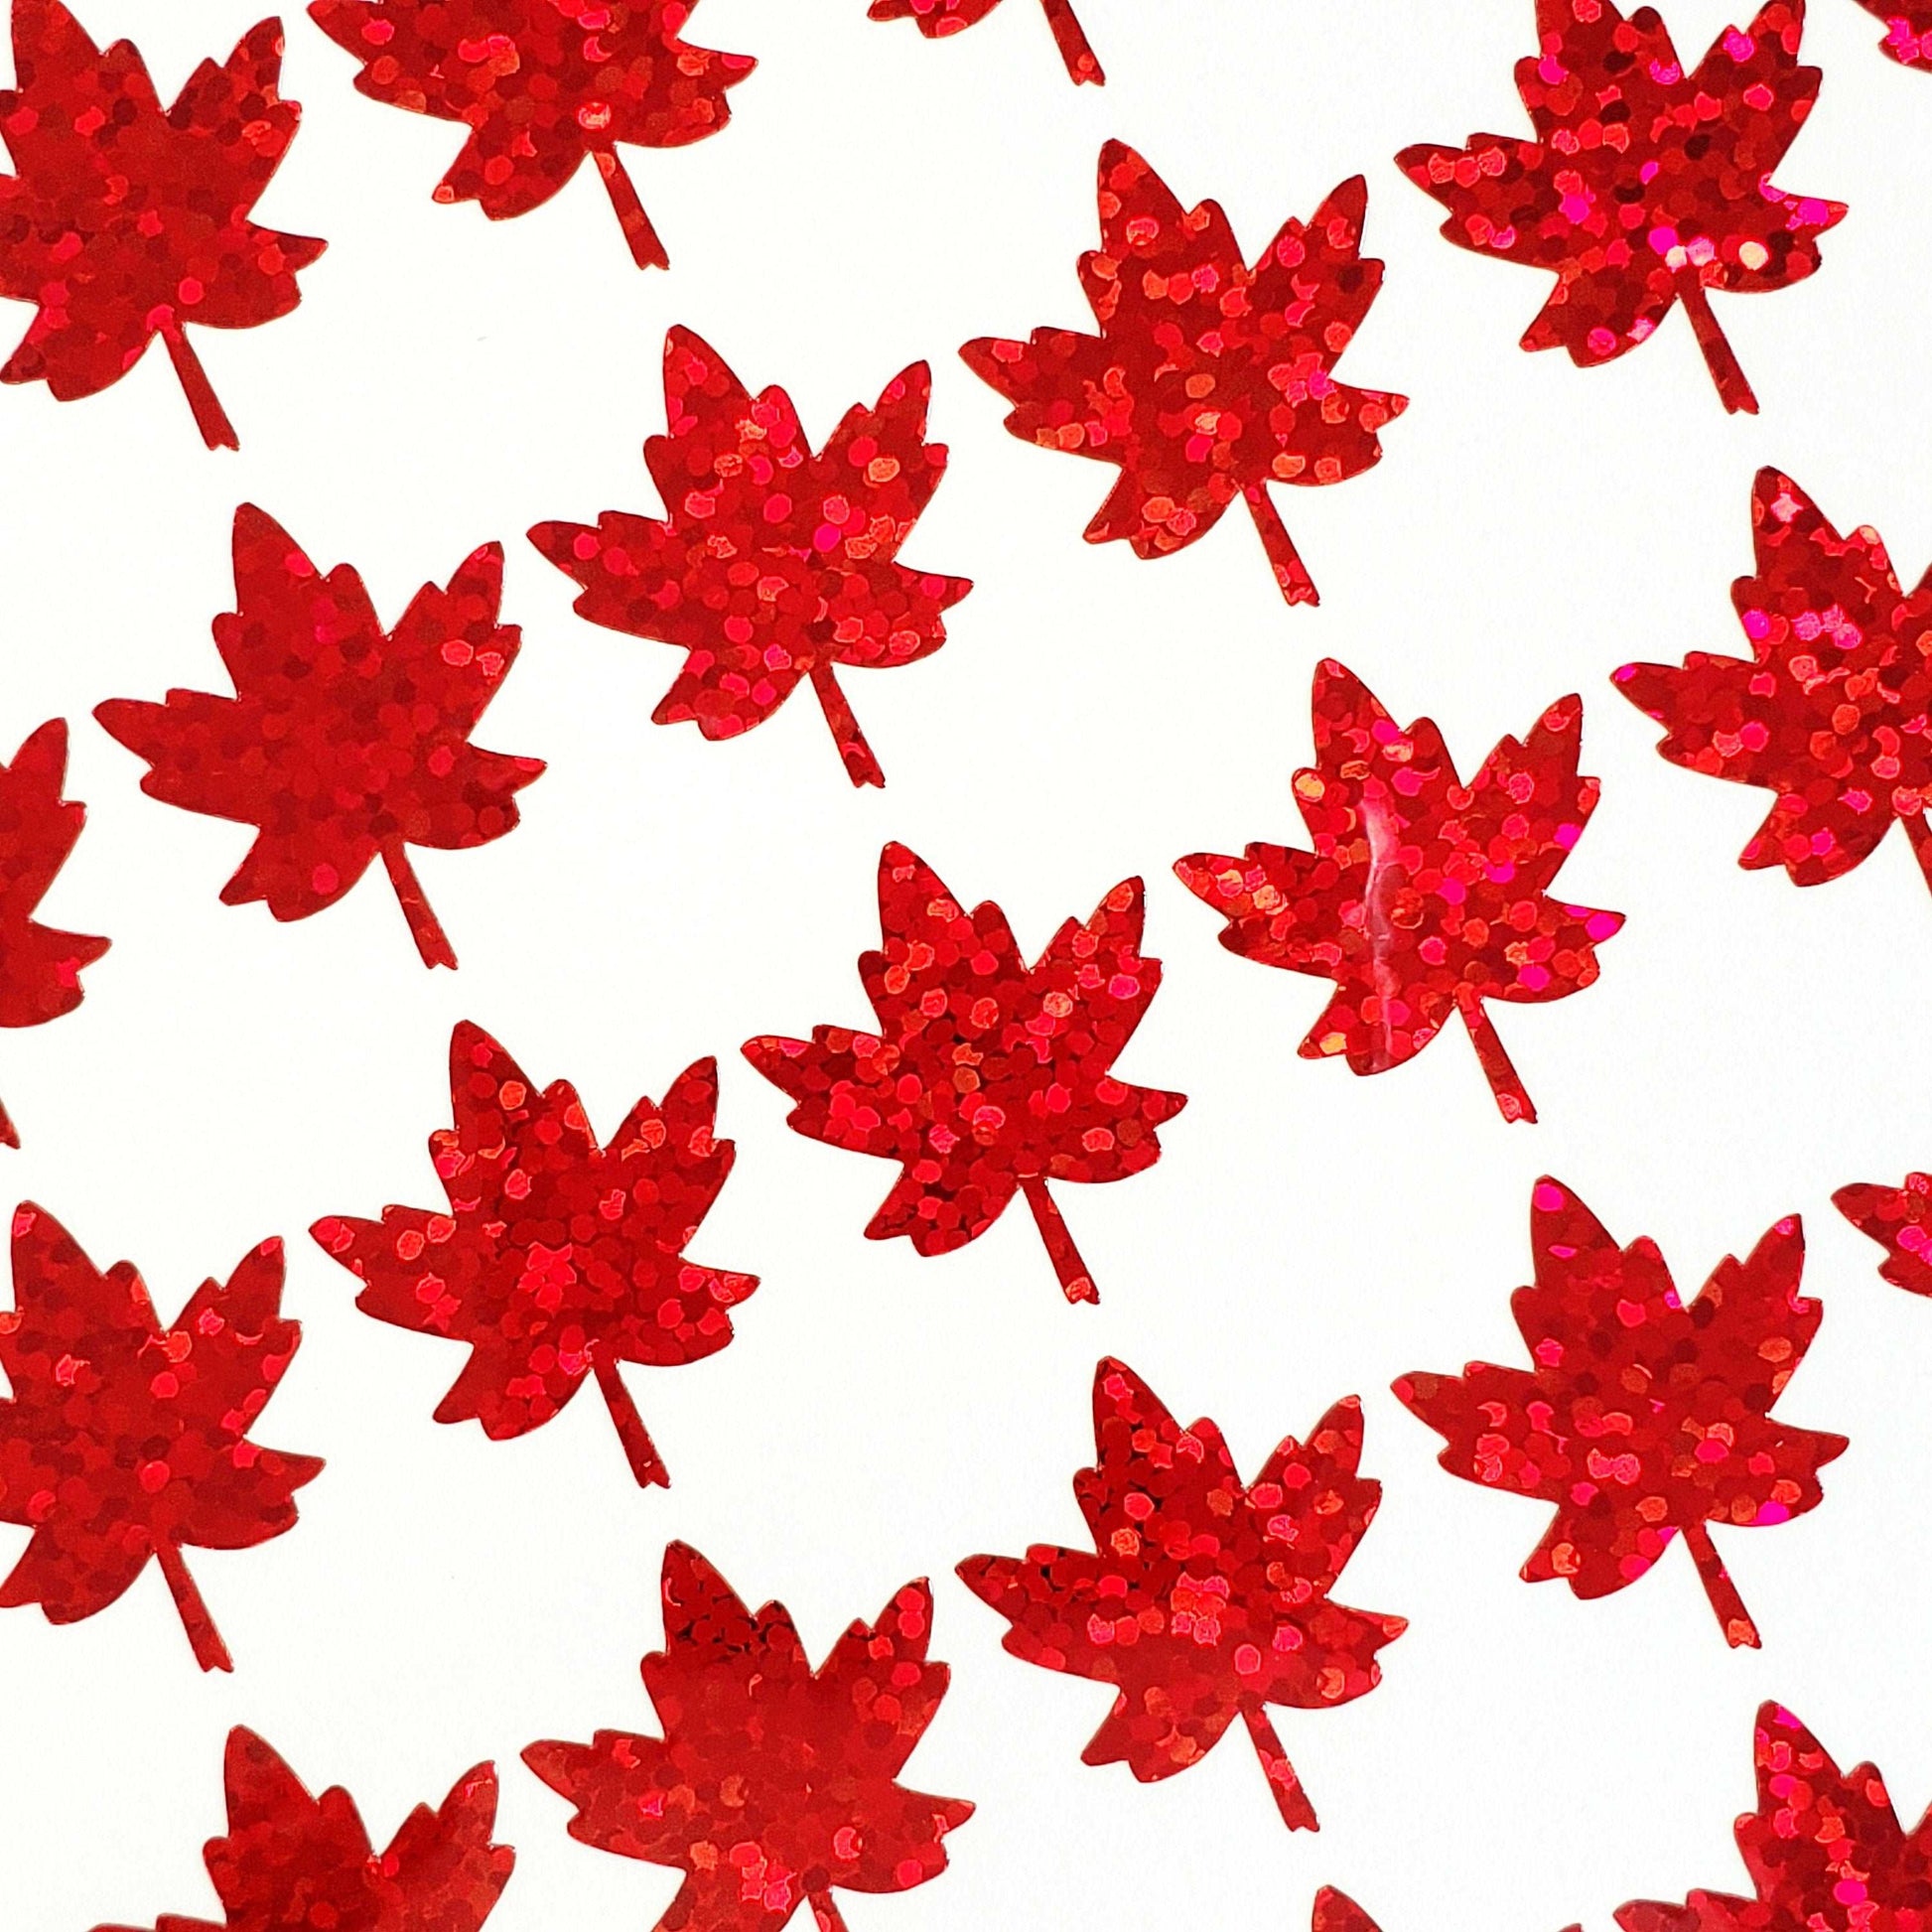 Red Maple Leaves Sticker Sheet, set of 45 red leaf vinyl decals for Autumn weddings, fall decor, planners, scrapbook pages and Thanksgiving.